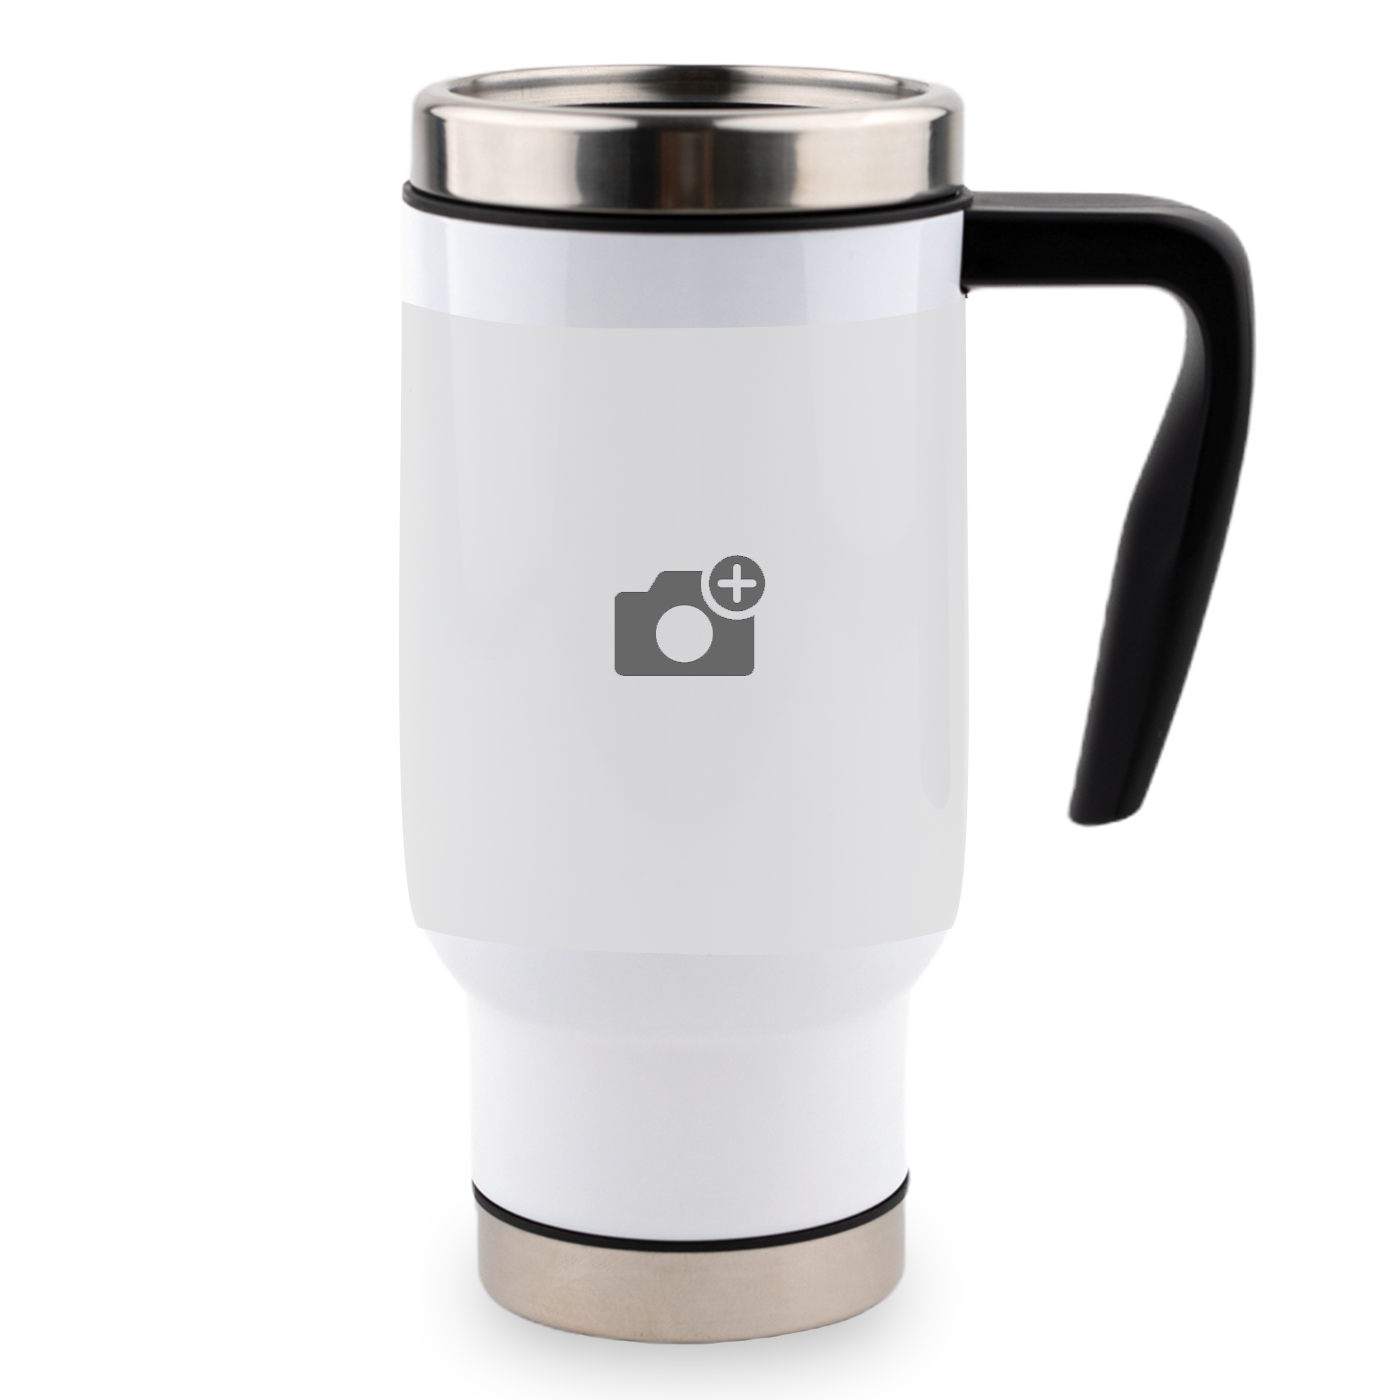 Print thermos cup